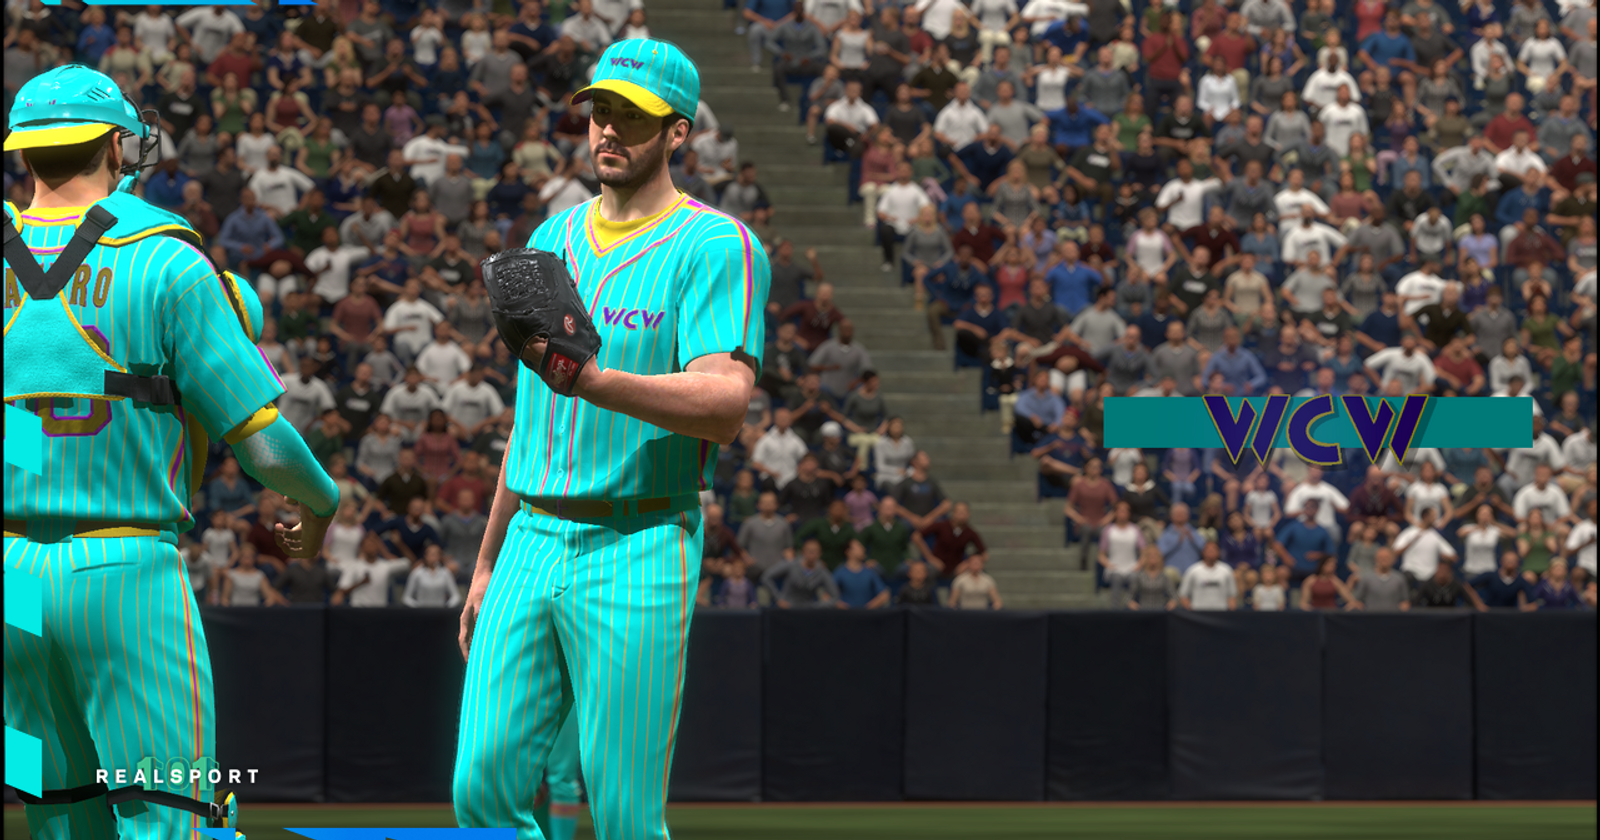 What do you think of my custom jerseys : r/MLBTheShow